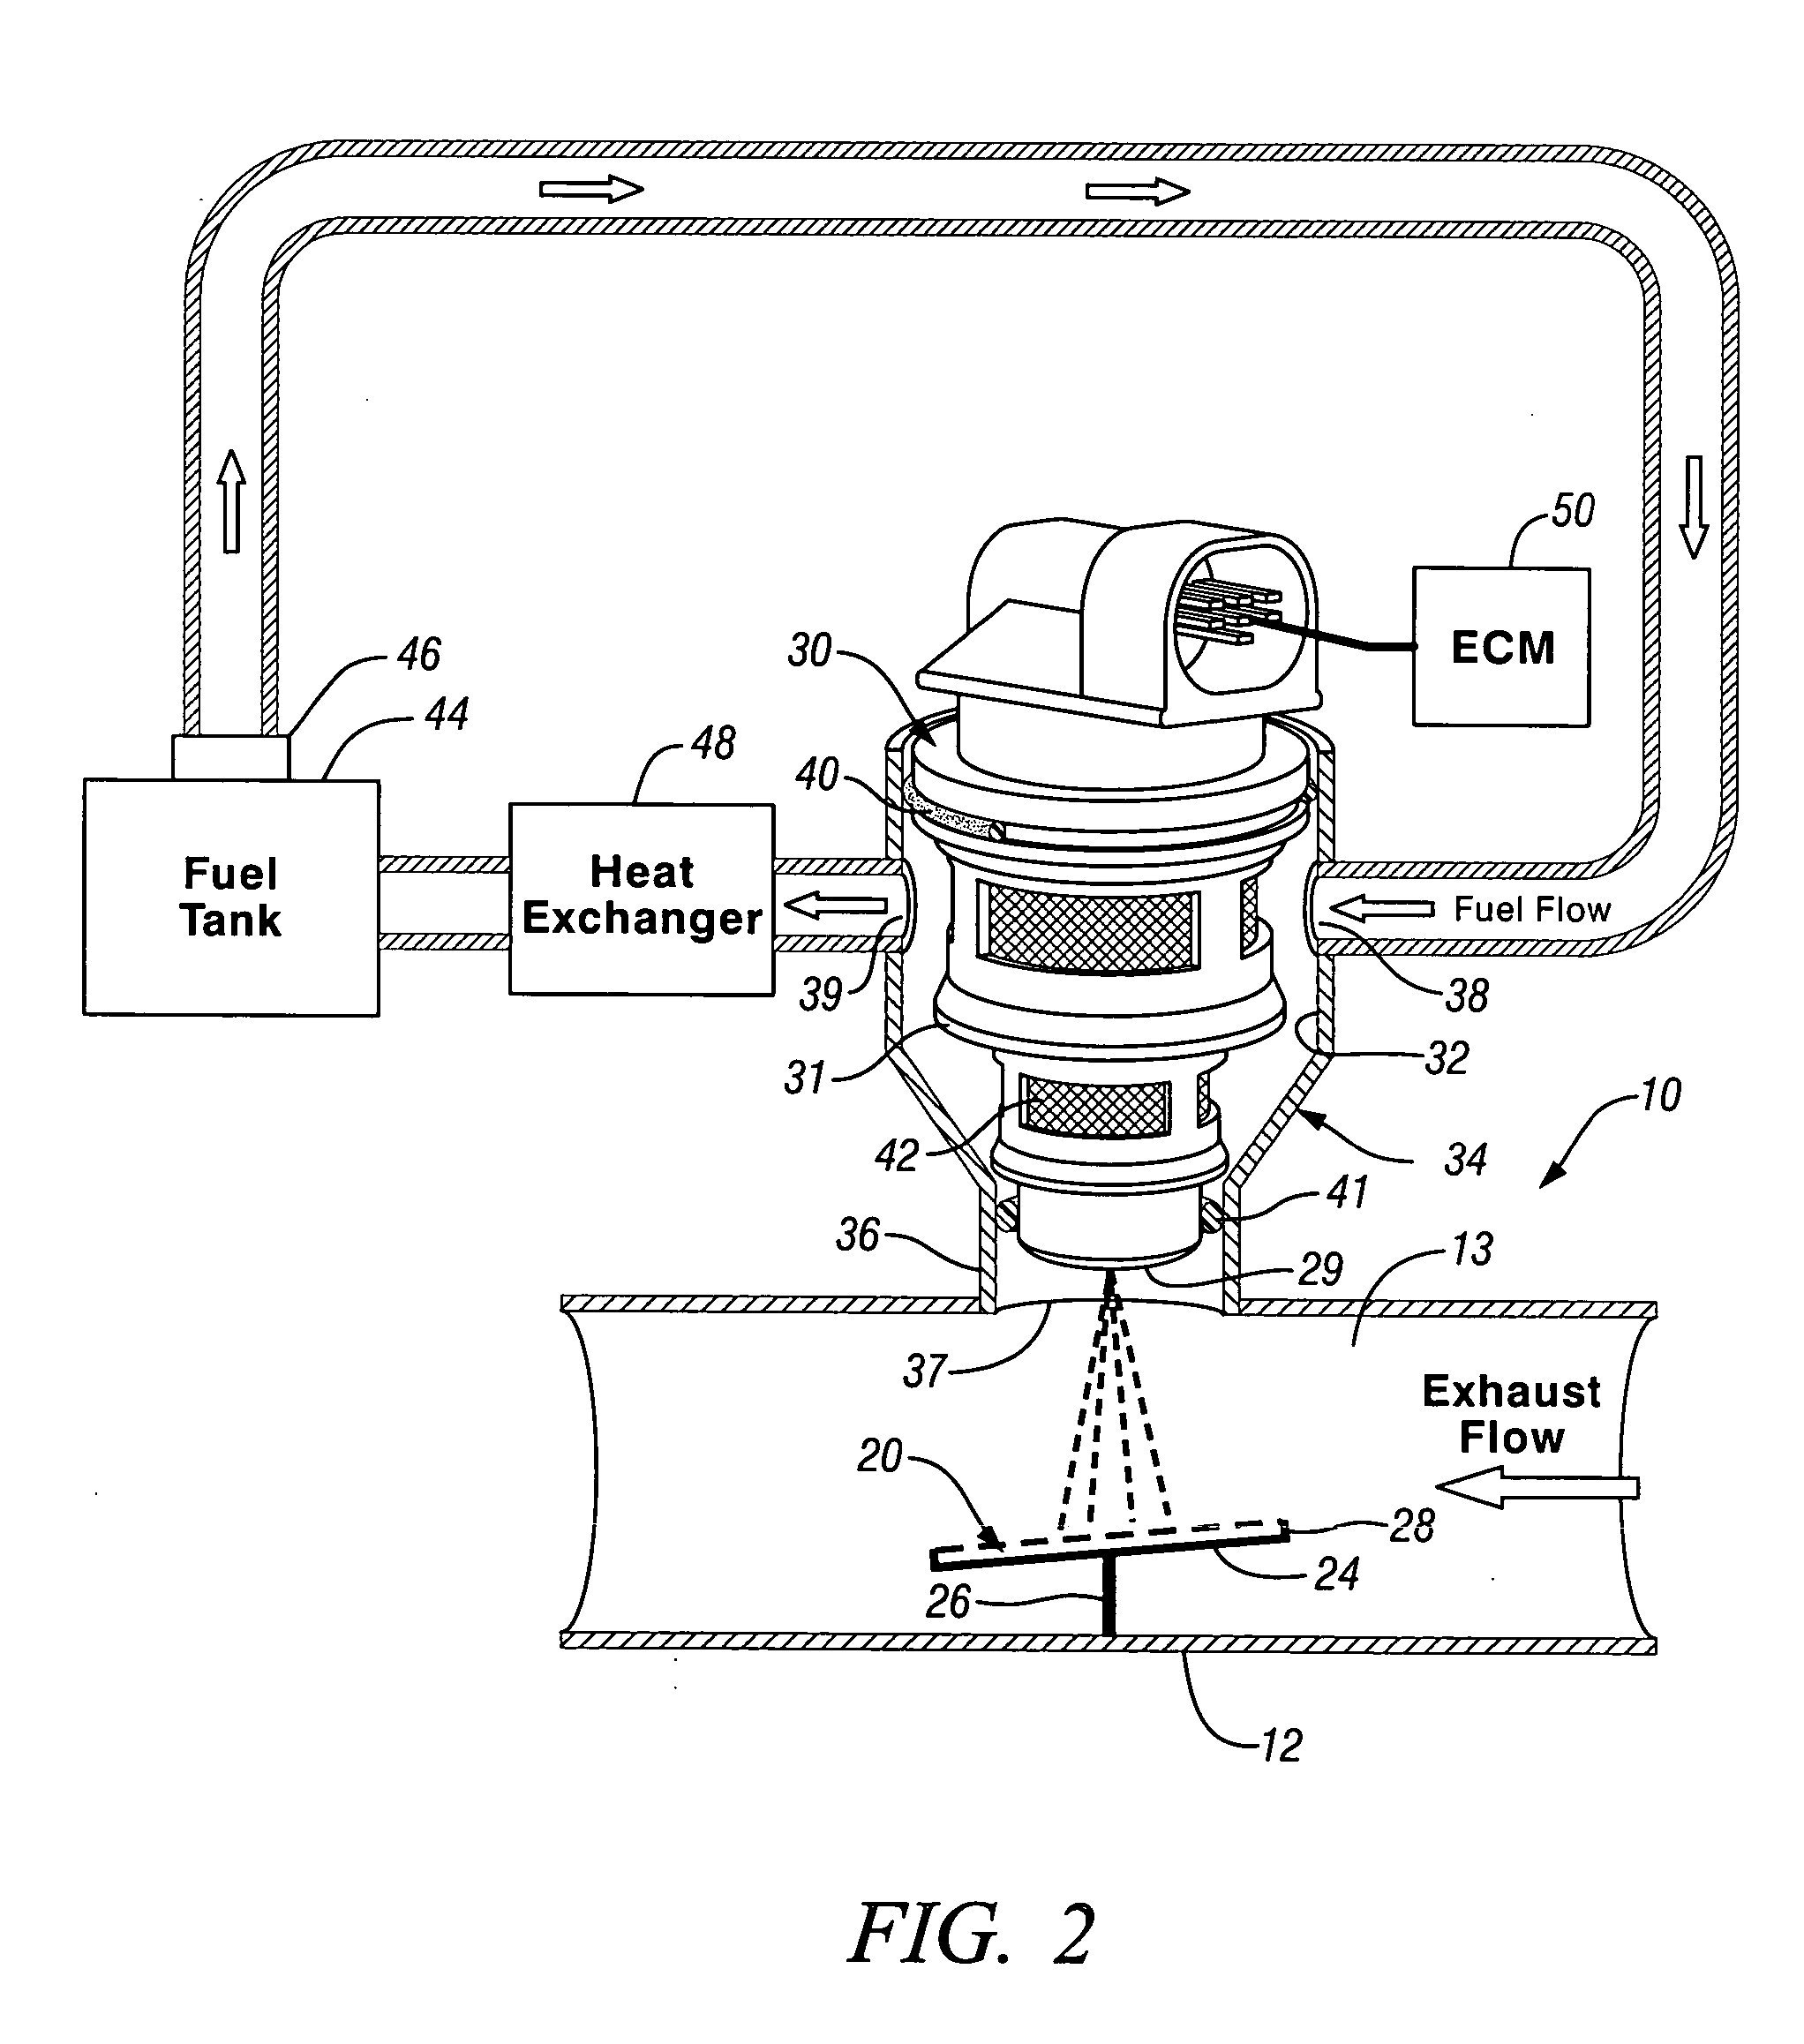 Diesel exhaust aftertreatment device regeneration system